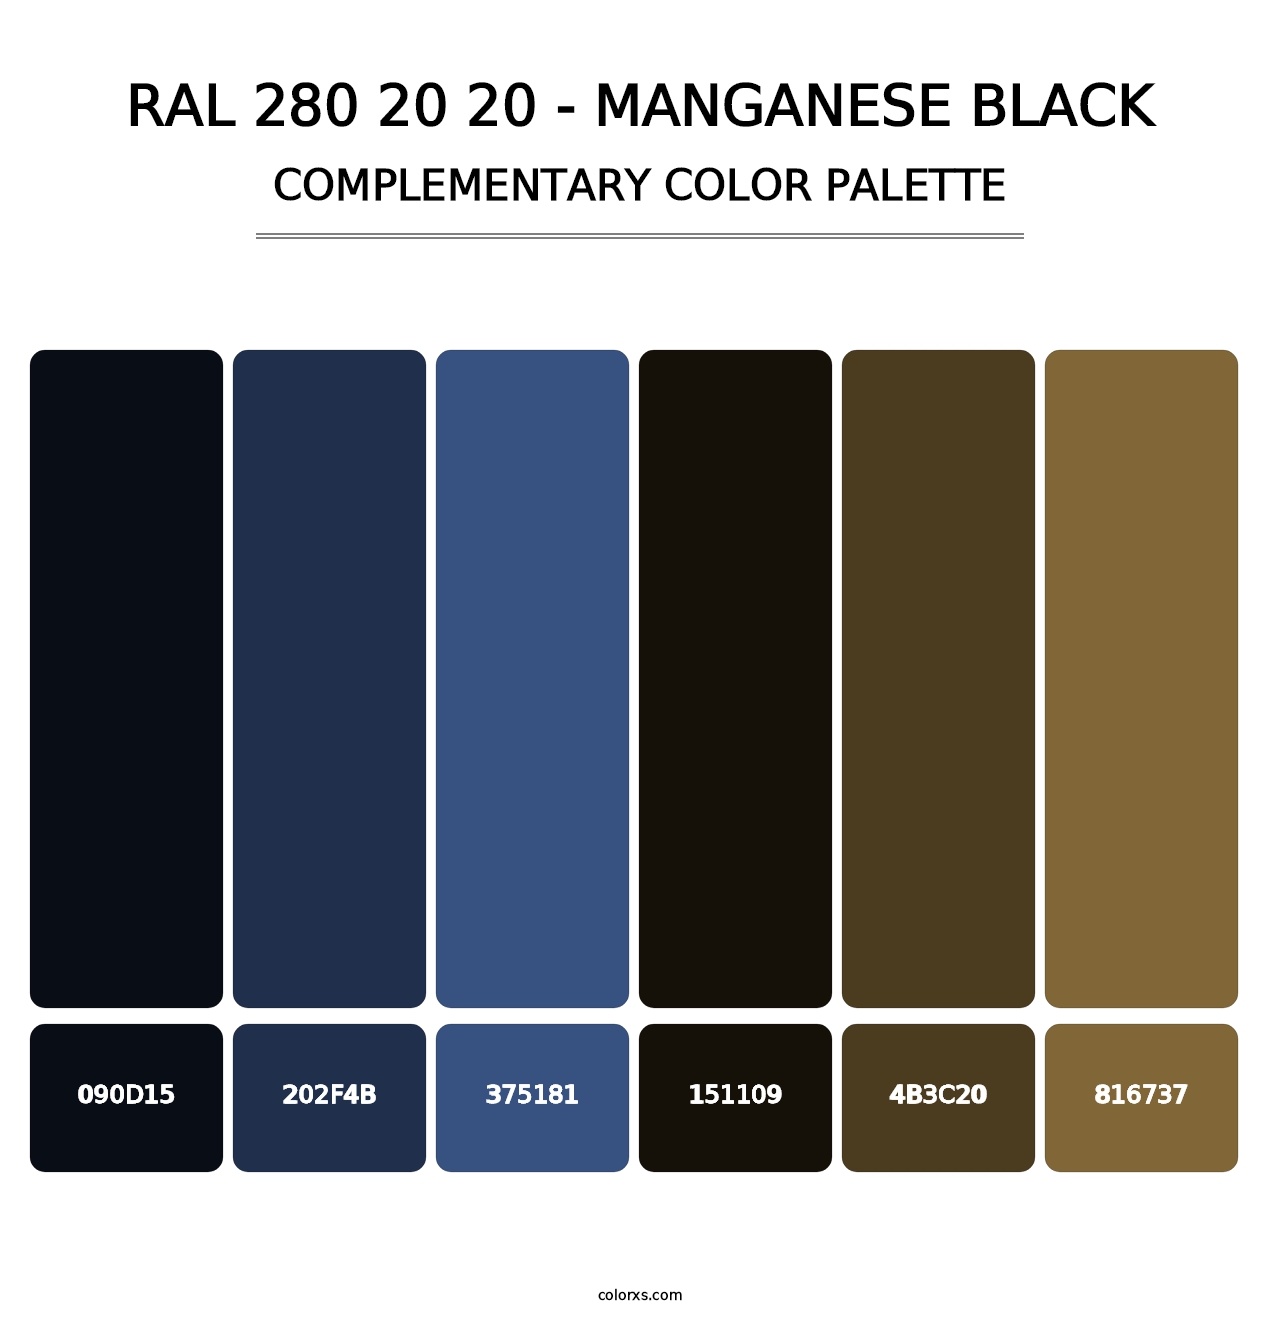 RAL 280 20 20 - Manganese Black - Complementary Color Palette